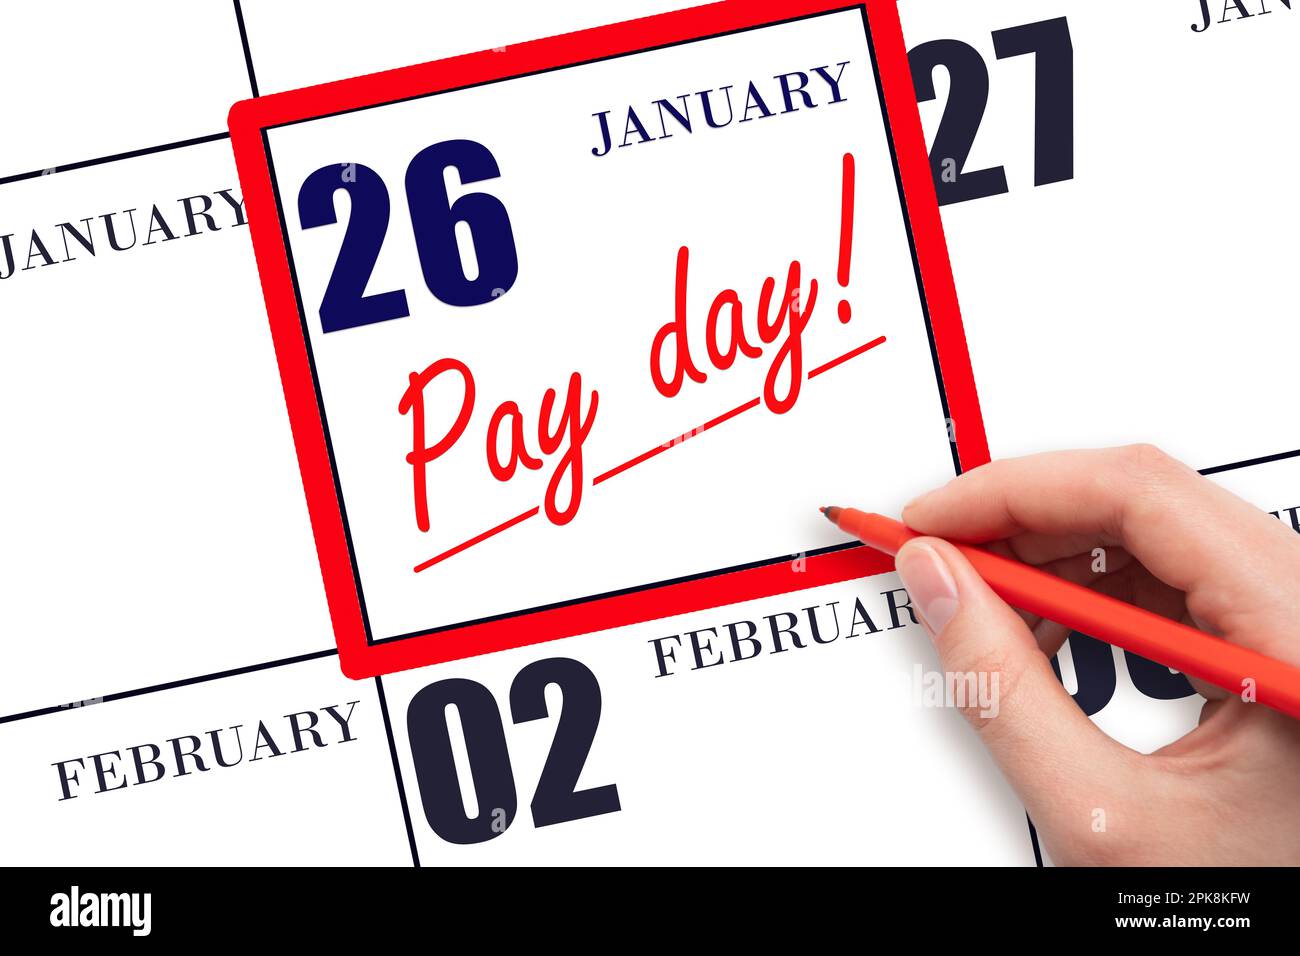 26th day of January. Hand writing text PAY DATE on calendar date January 26 and underline it. Payment due date. Reminder concept of payment. Winter mo Stock Photo